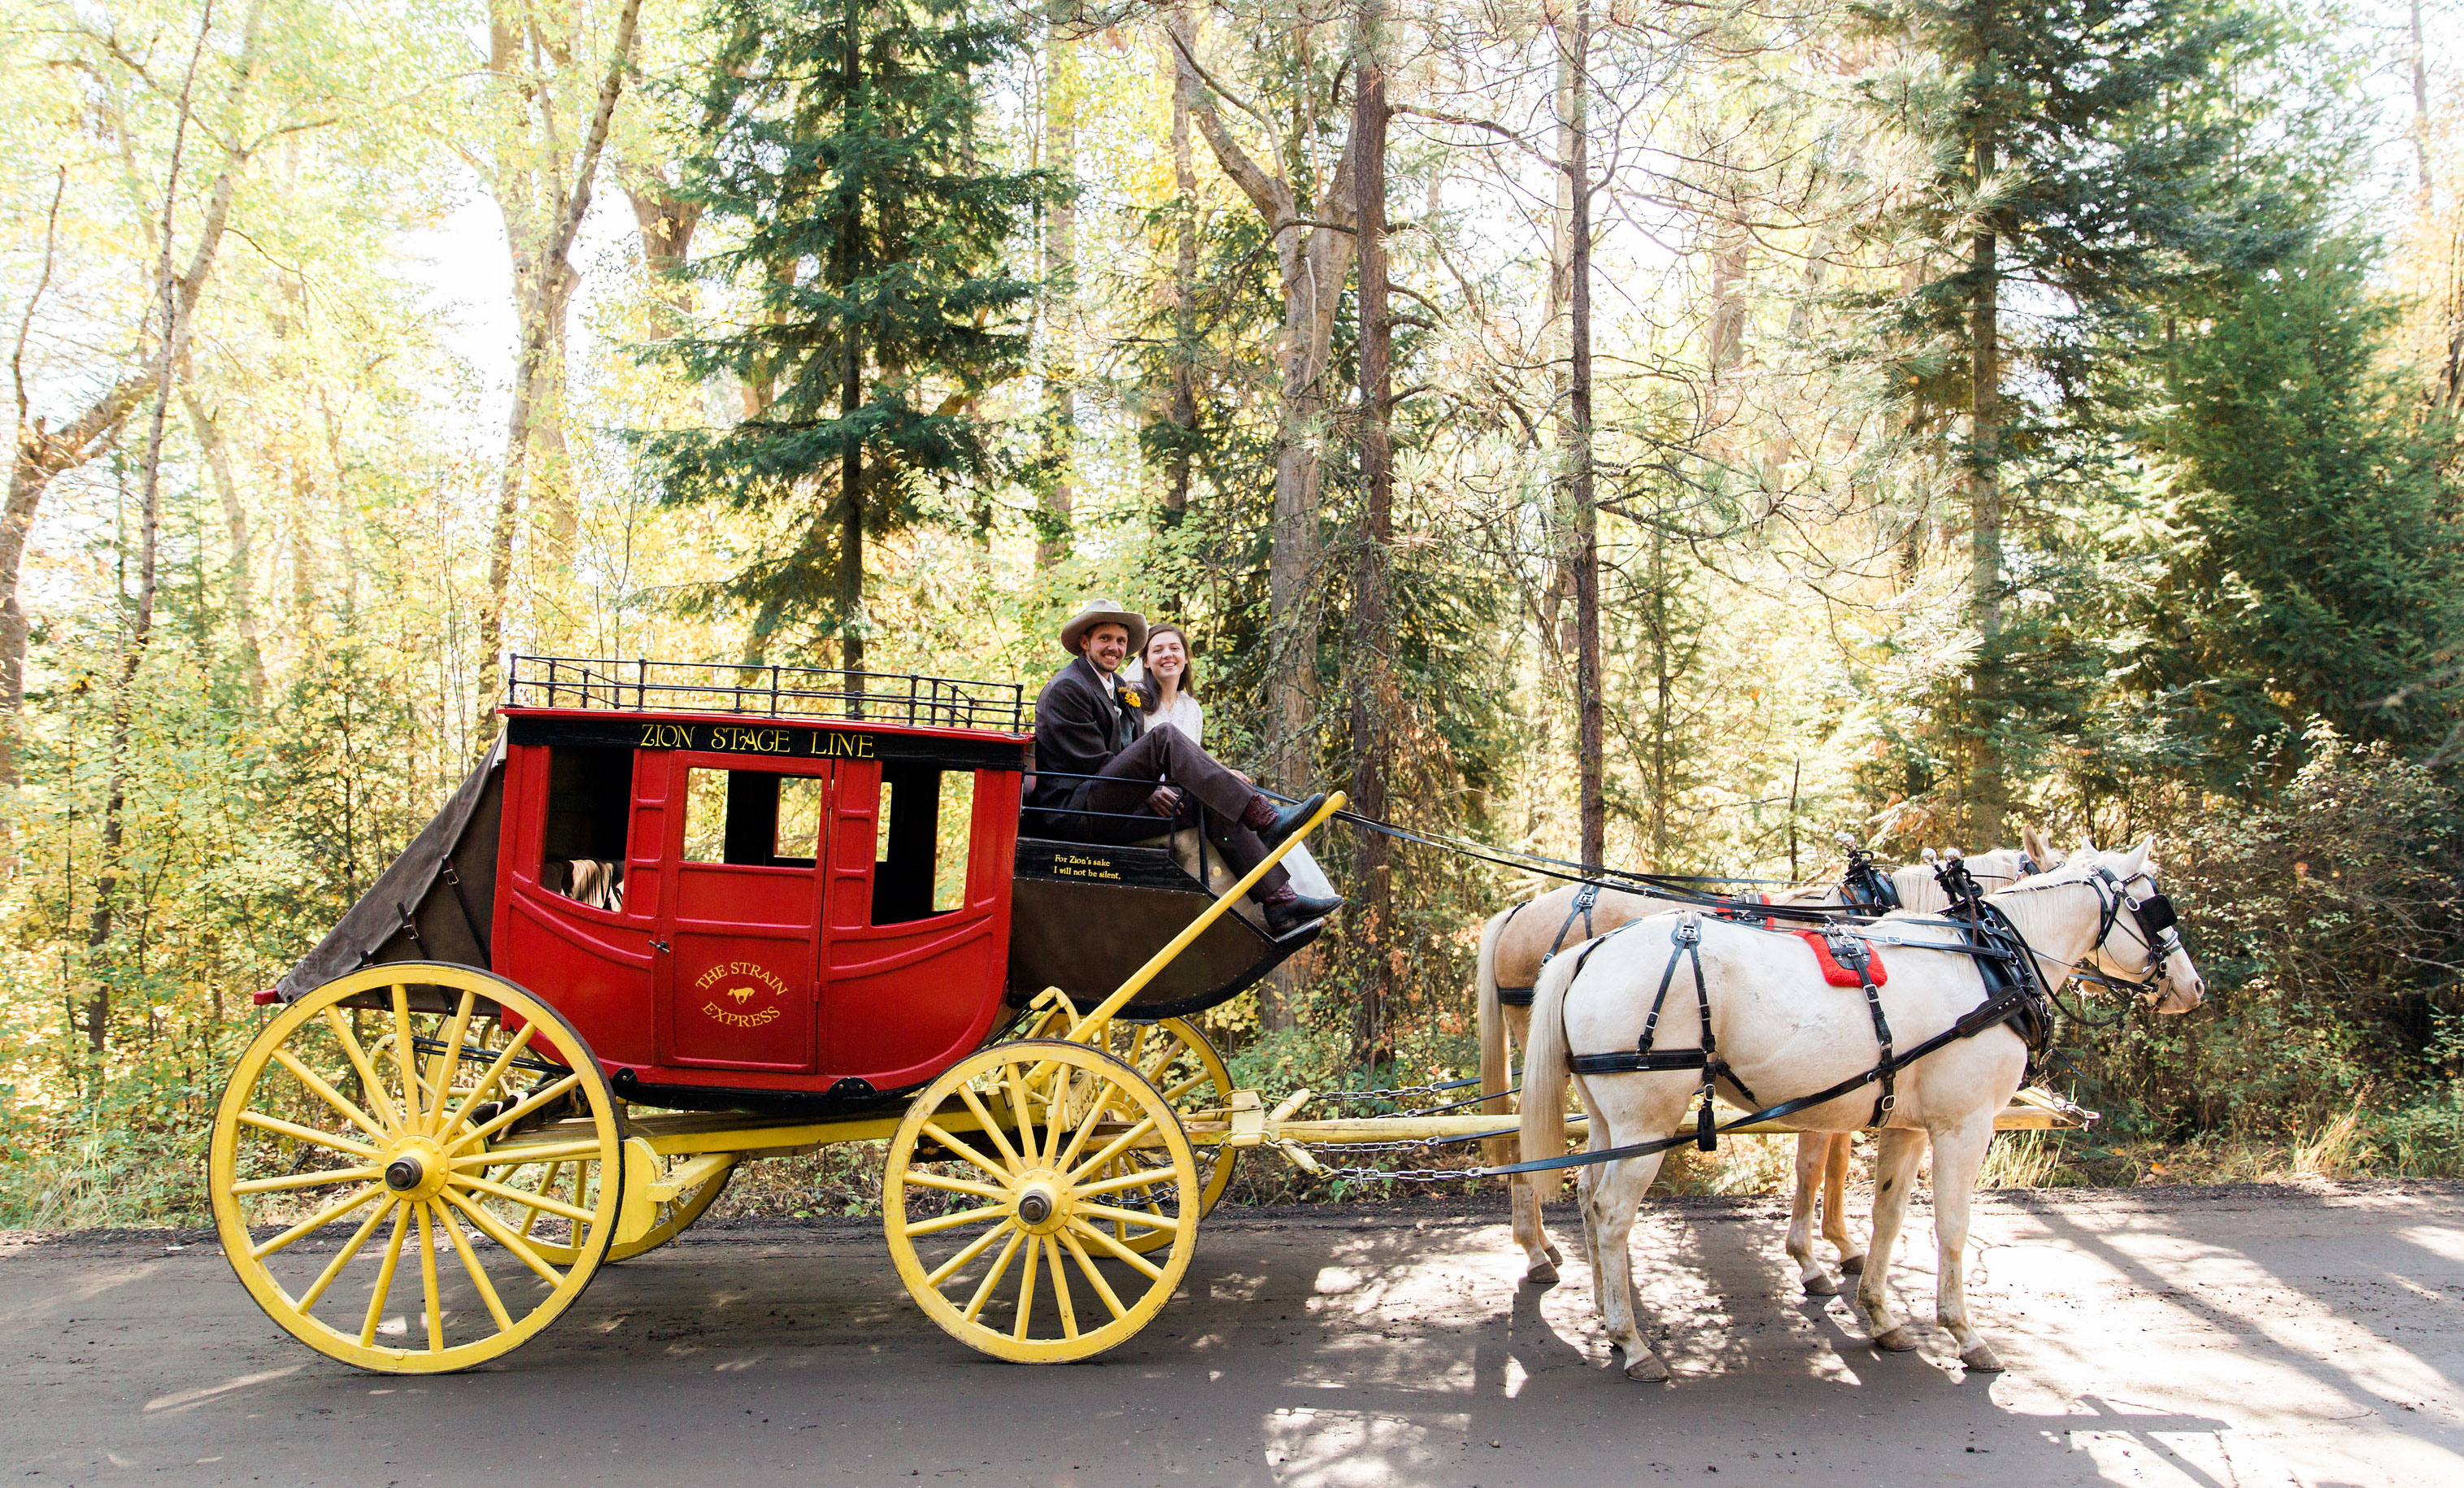 Stagecoach Wedding Backdrop Photos with Zion Stage Line